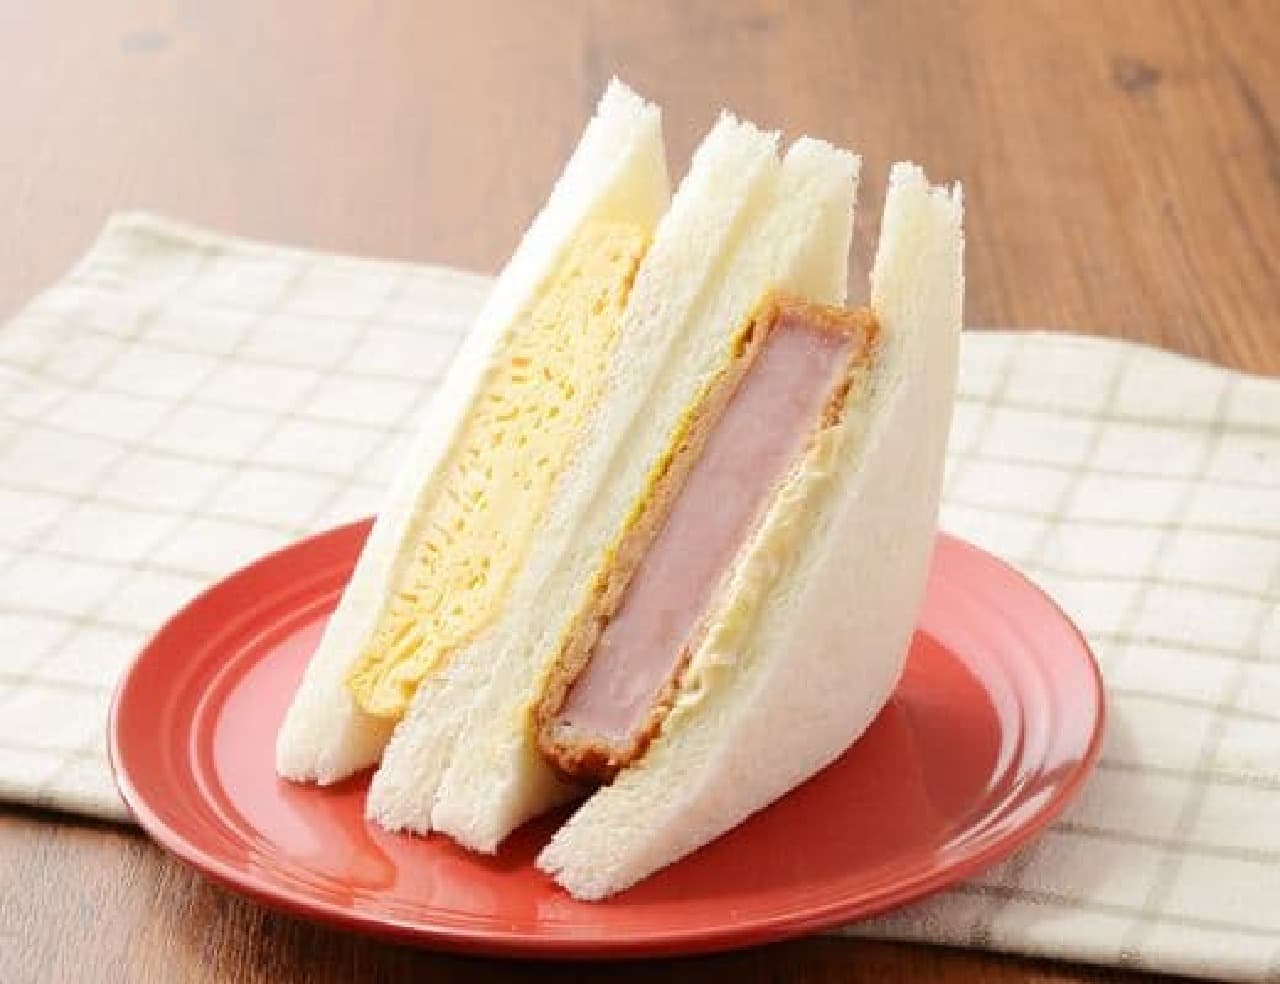 Lawson "Thick-sliced egg & thick-sliced ham cutlet sandwich